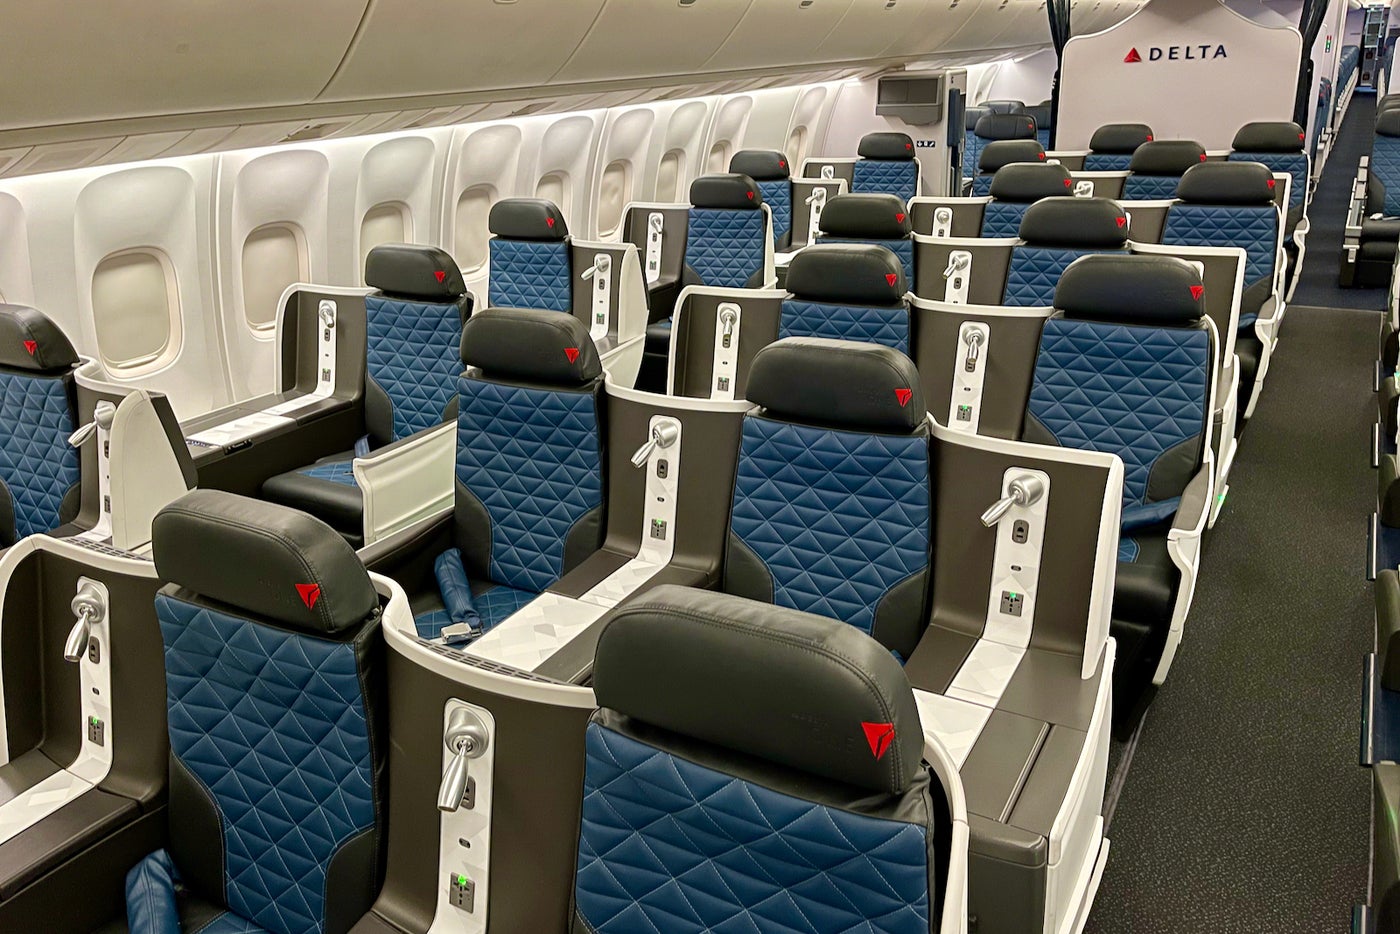 Onboard Delta's first retrofitted Boeing 767 with snazzy new cabins